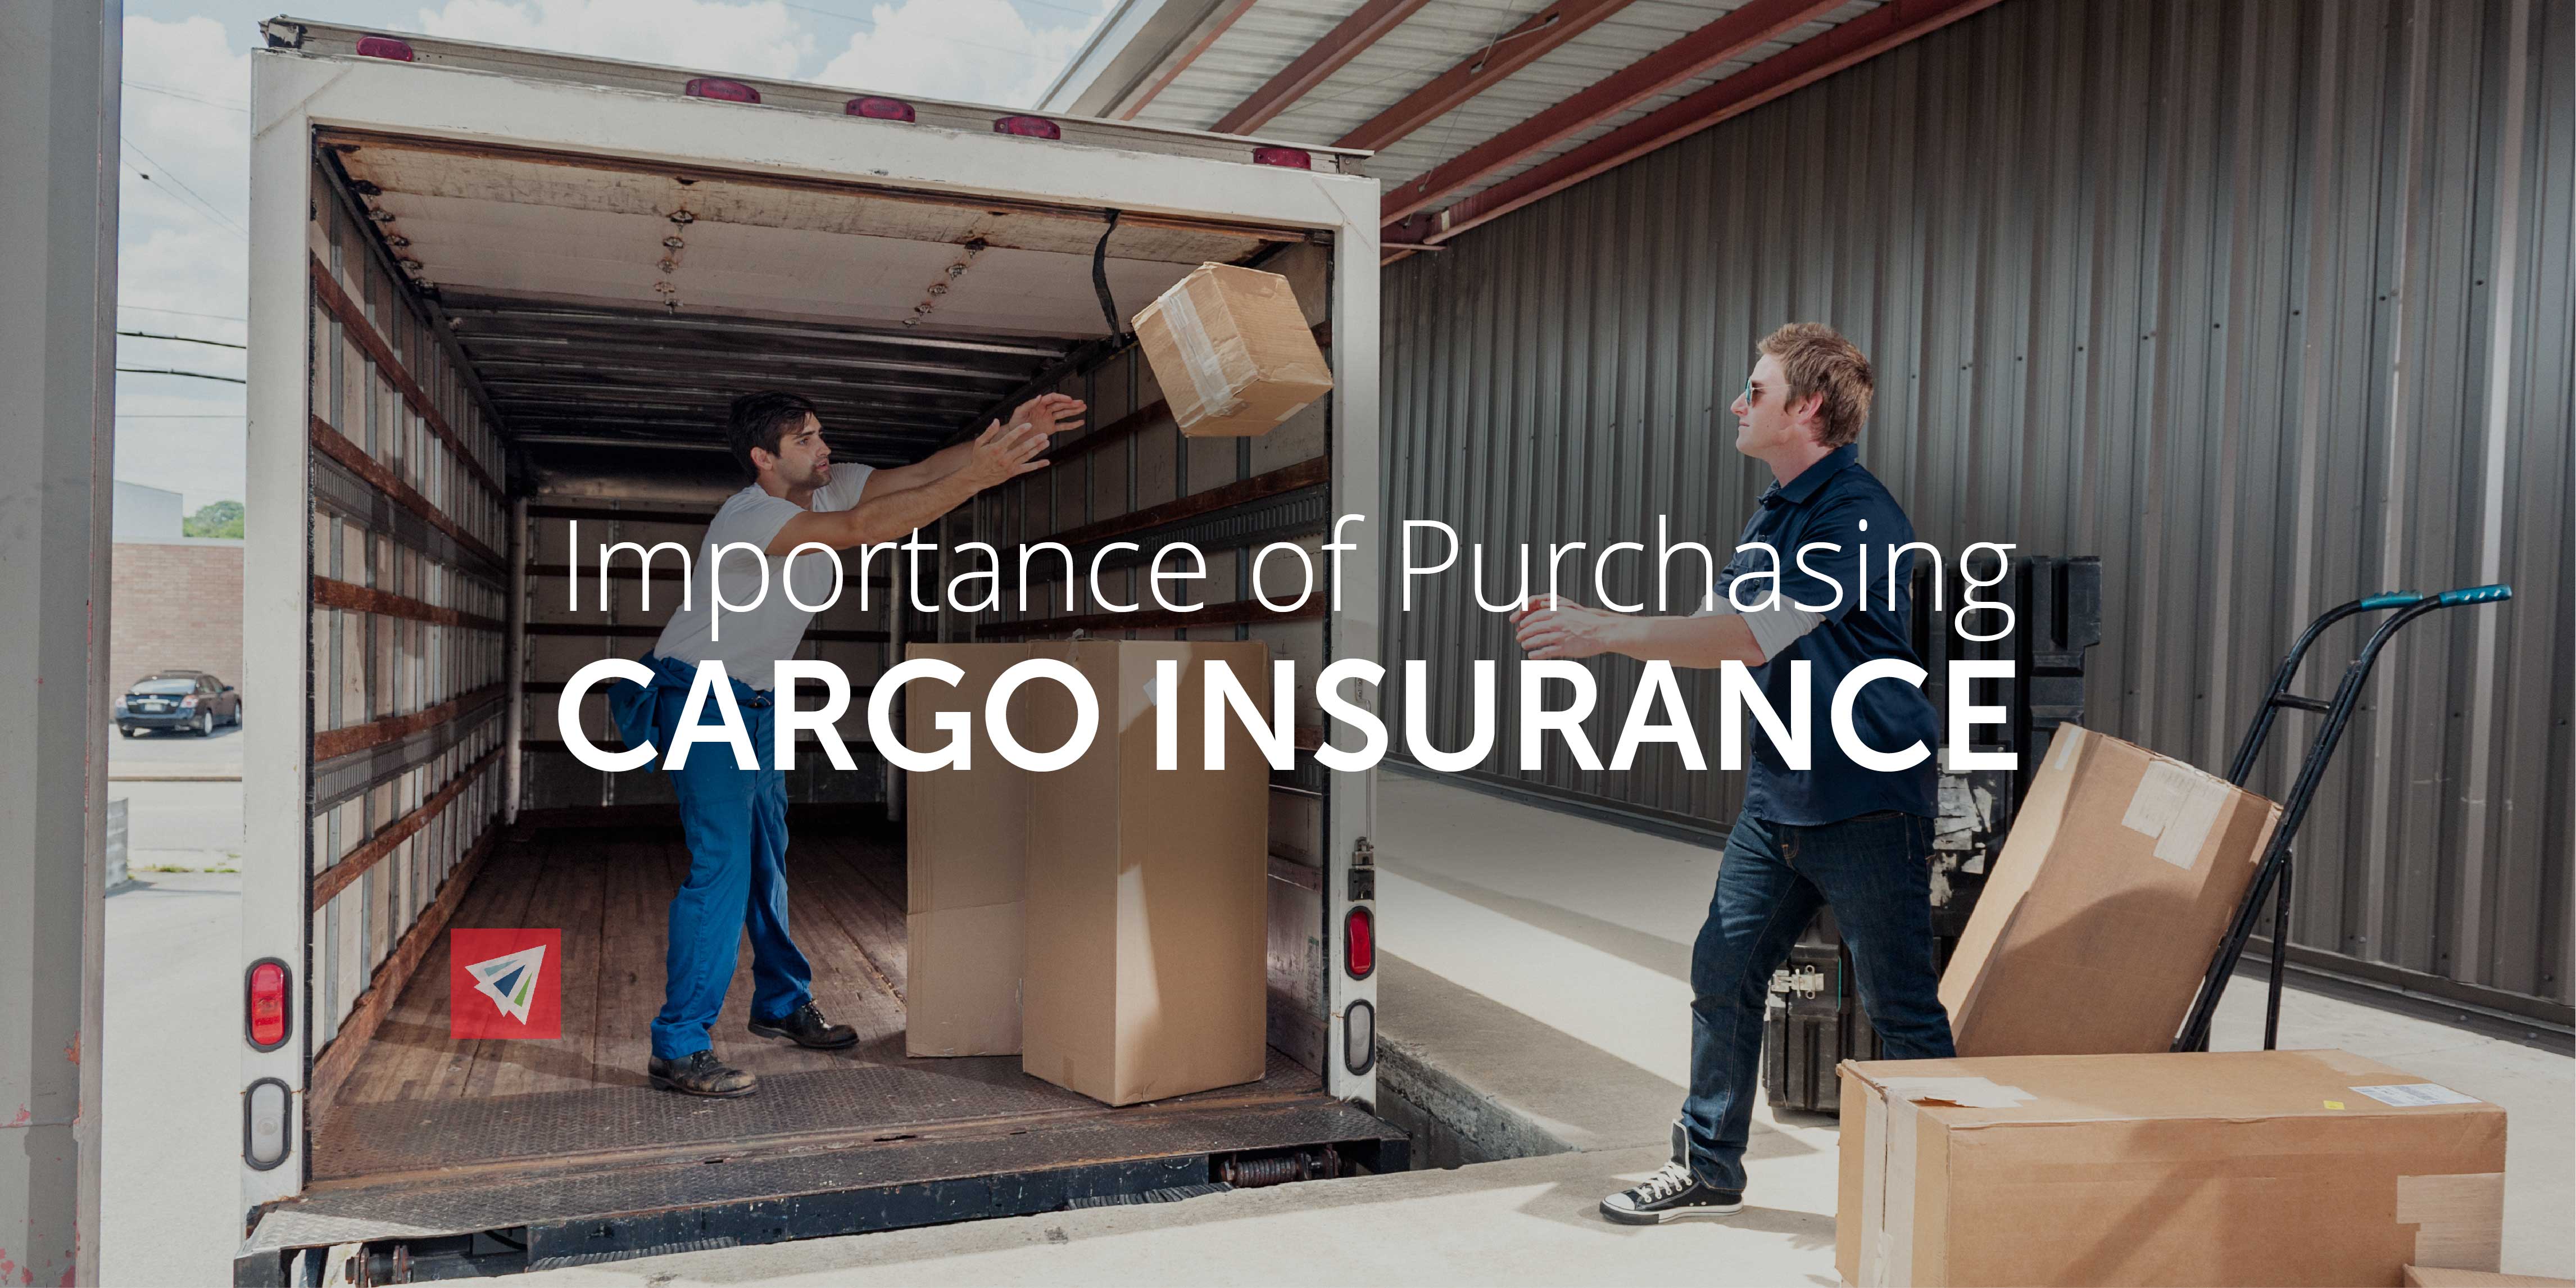 Importance of Purchasing Cargo Insurance